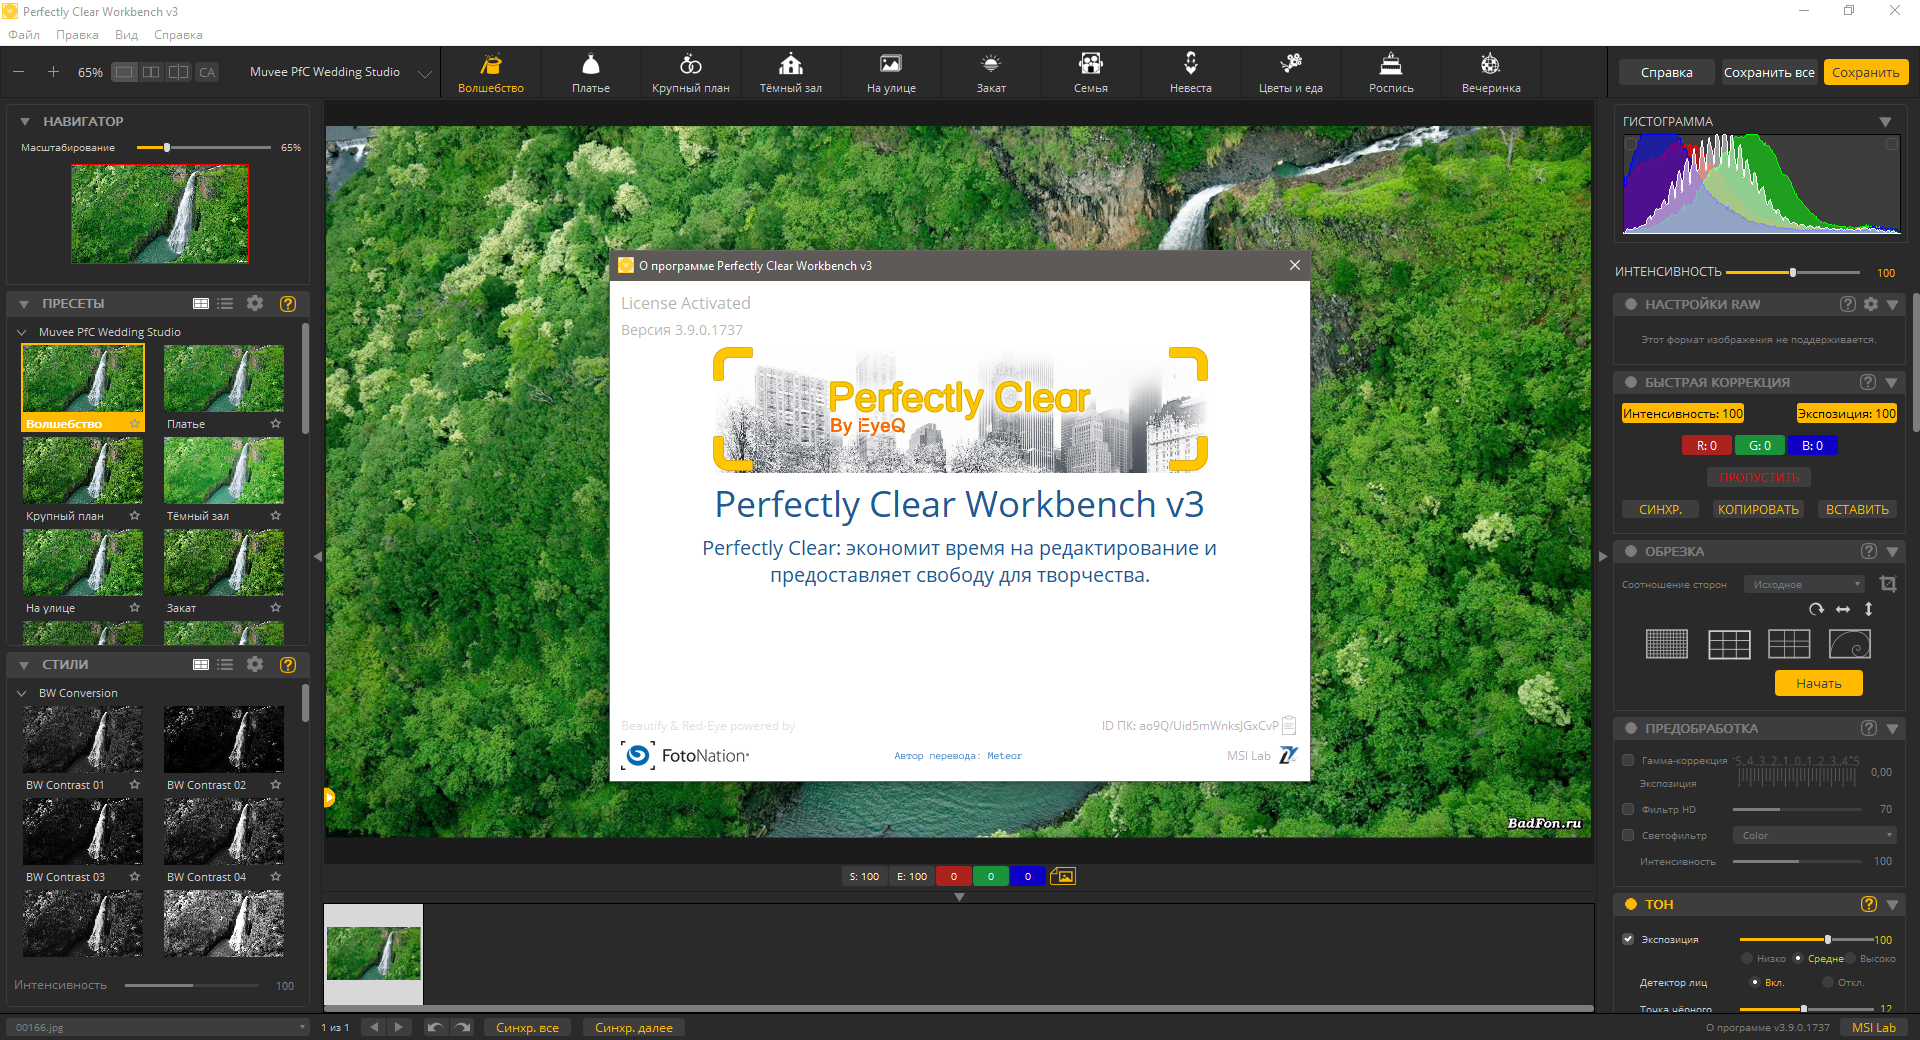 Perfectly Clear WorkBench 4.5.0.2524 for apple download